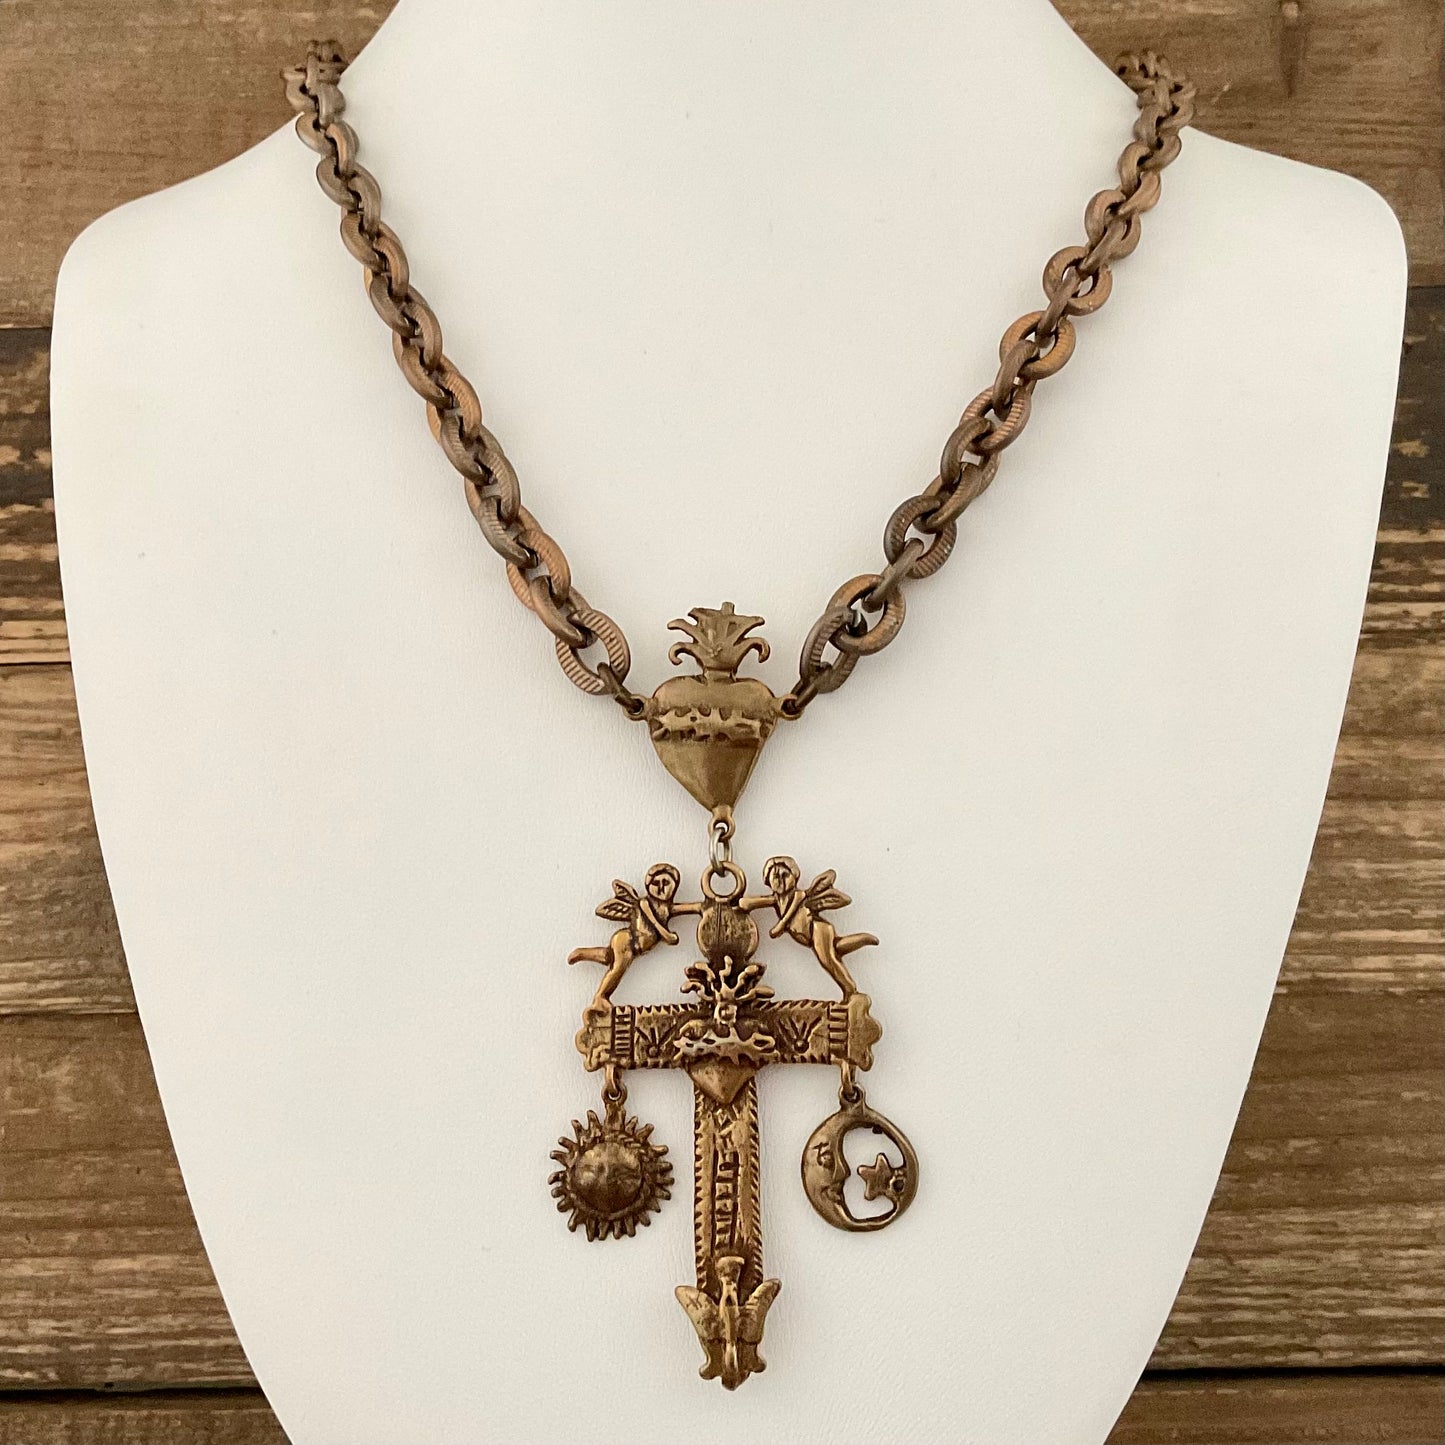 Antique Brass Chain with Cross Pendant 18"